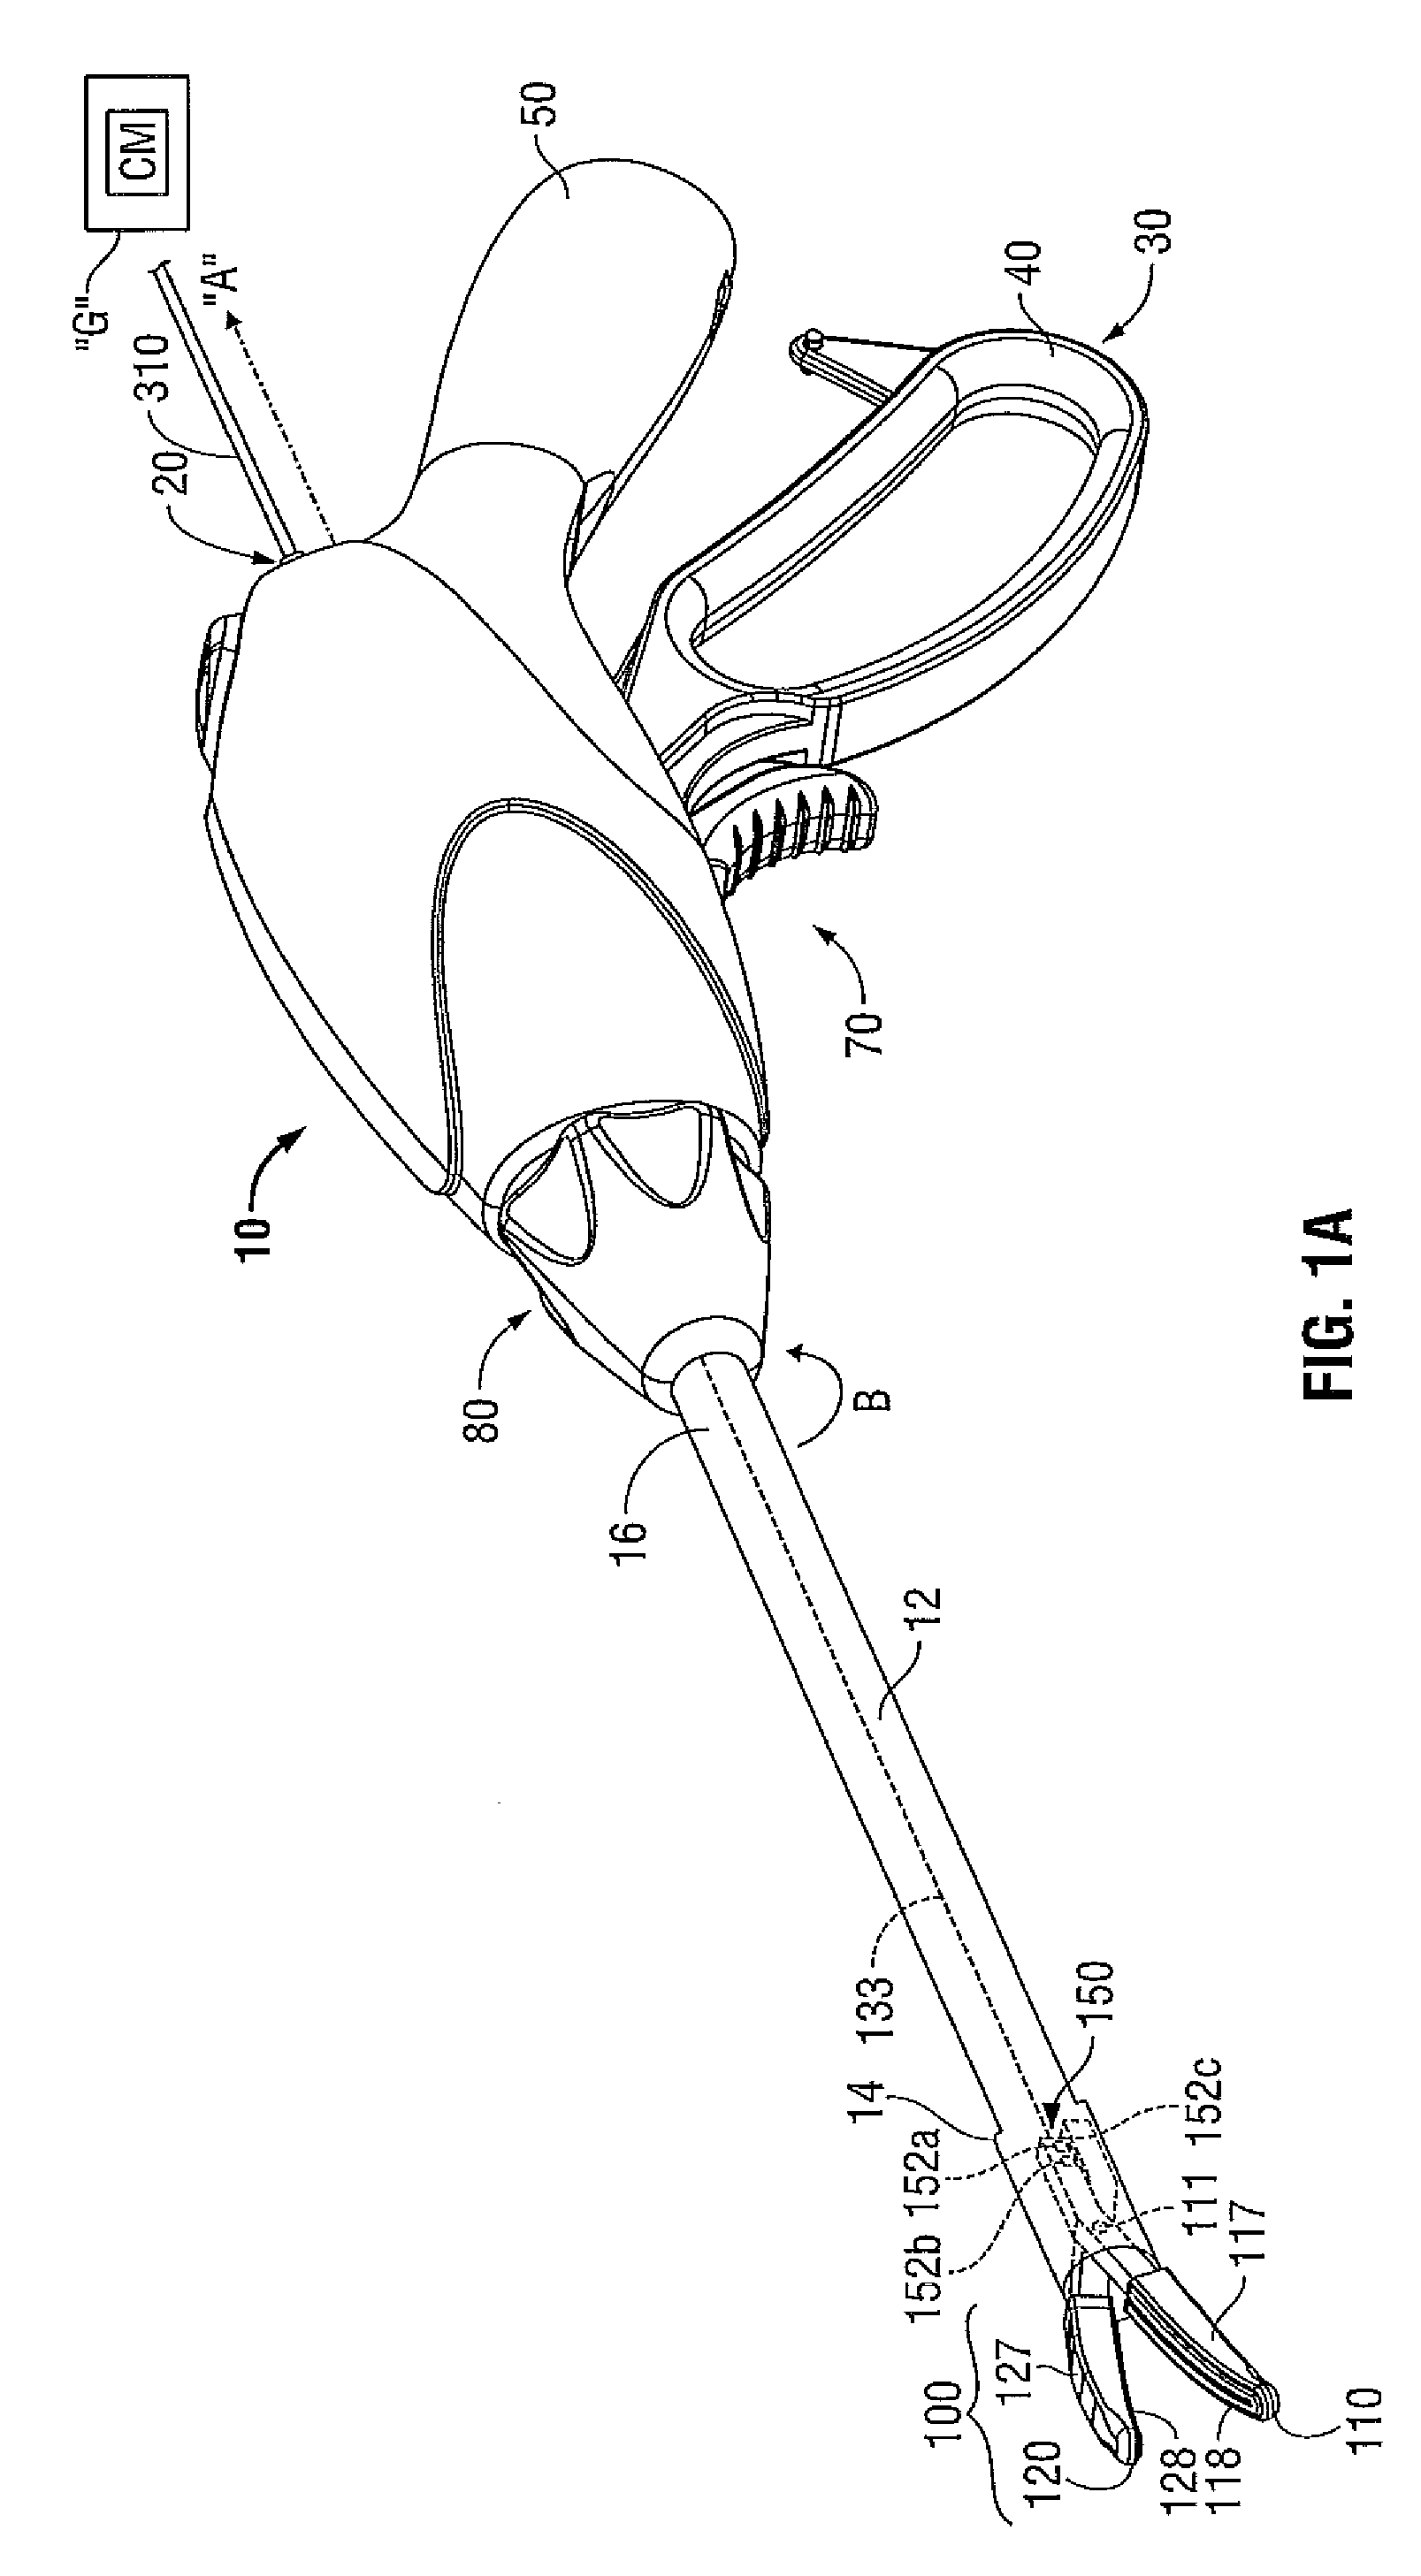 Apparatus for Performing an Electrosurgical Procedure